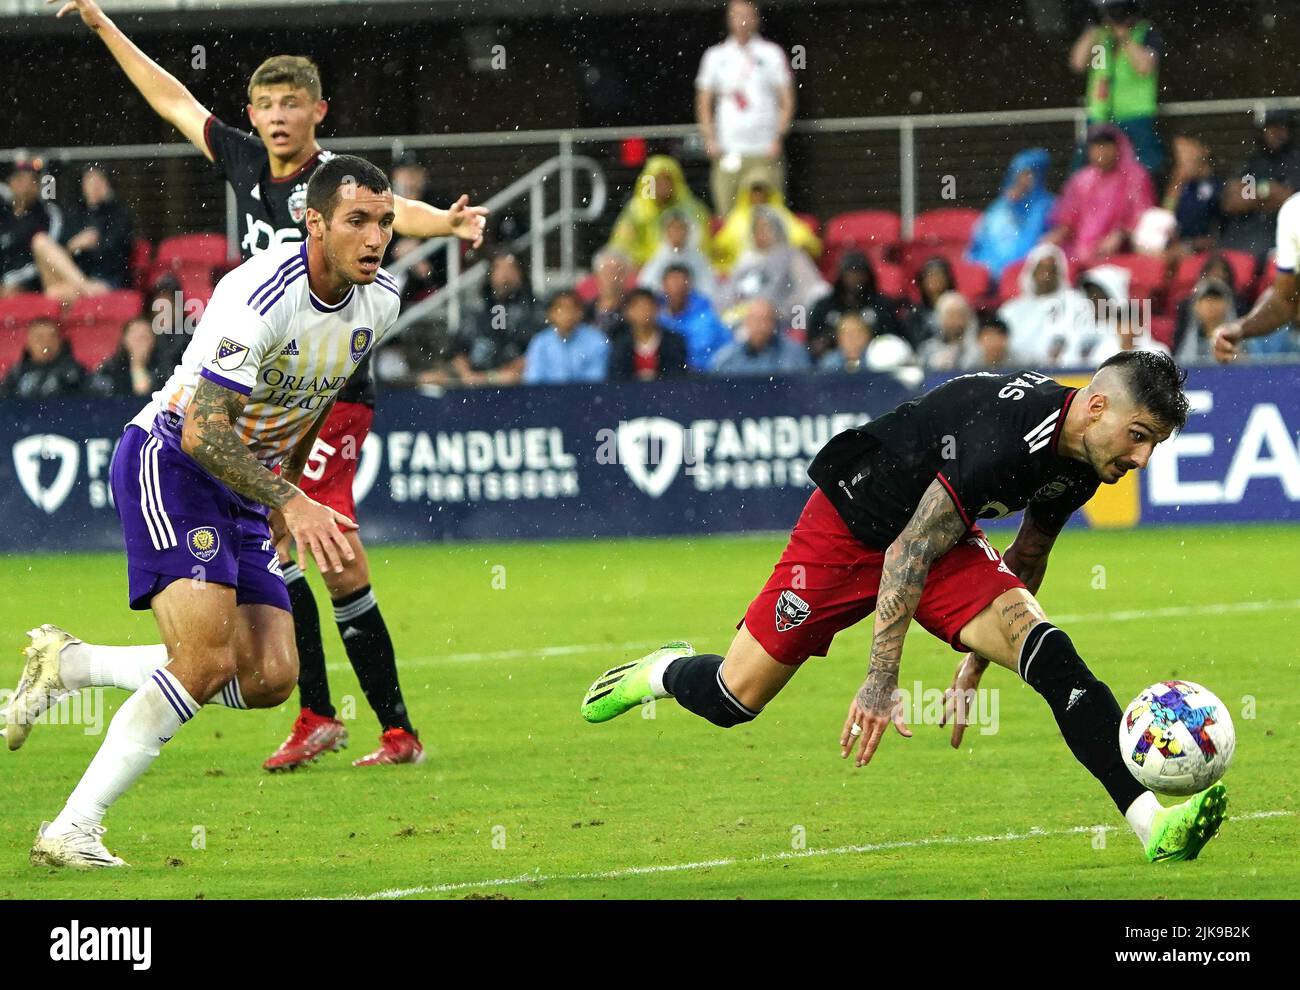 WASHINGTON, DC, USA - 31 JULY 2022: D.C. United forward Taxiarchis Fountas (11) lungs for the bal in front of Orlando City defender Antônio Carlos (25) during a MLS match between D.C United and the Orlando City SC, on July 31, 2022, at Audi Field, in Washington, DC. (Photo by Tony Quinn-Alamy Live News) Stock Photo